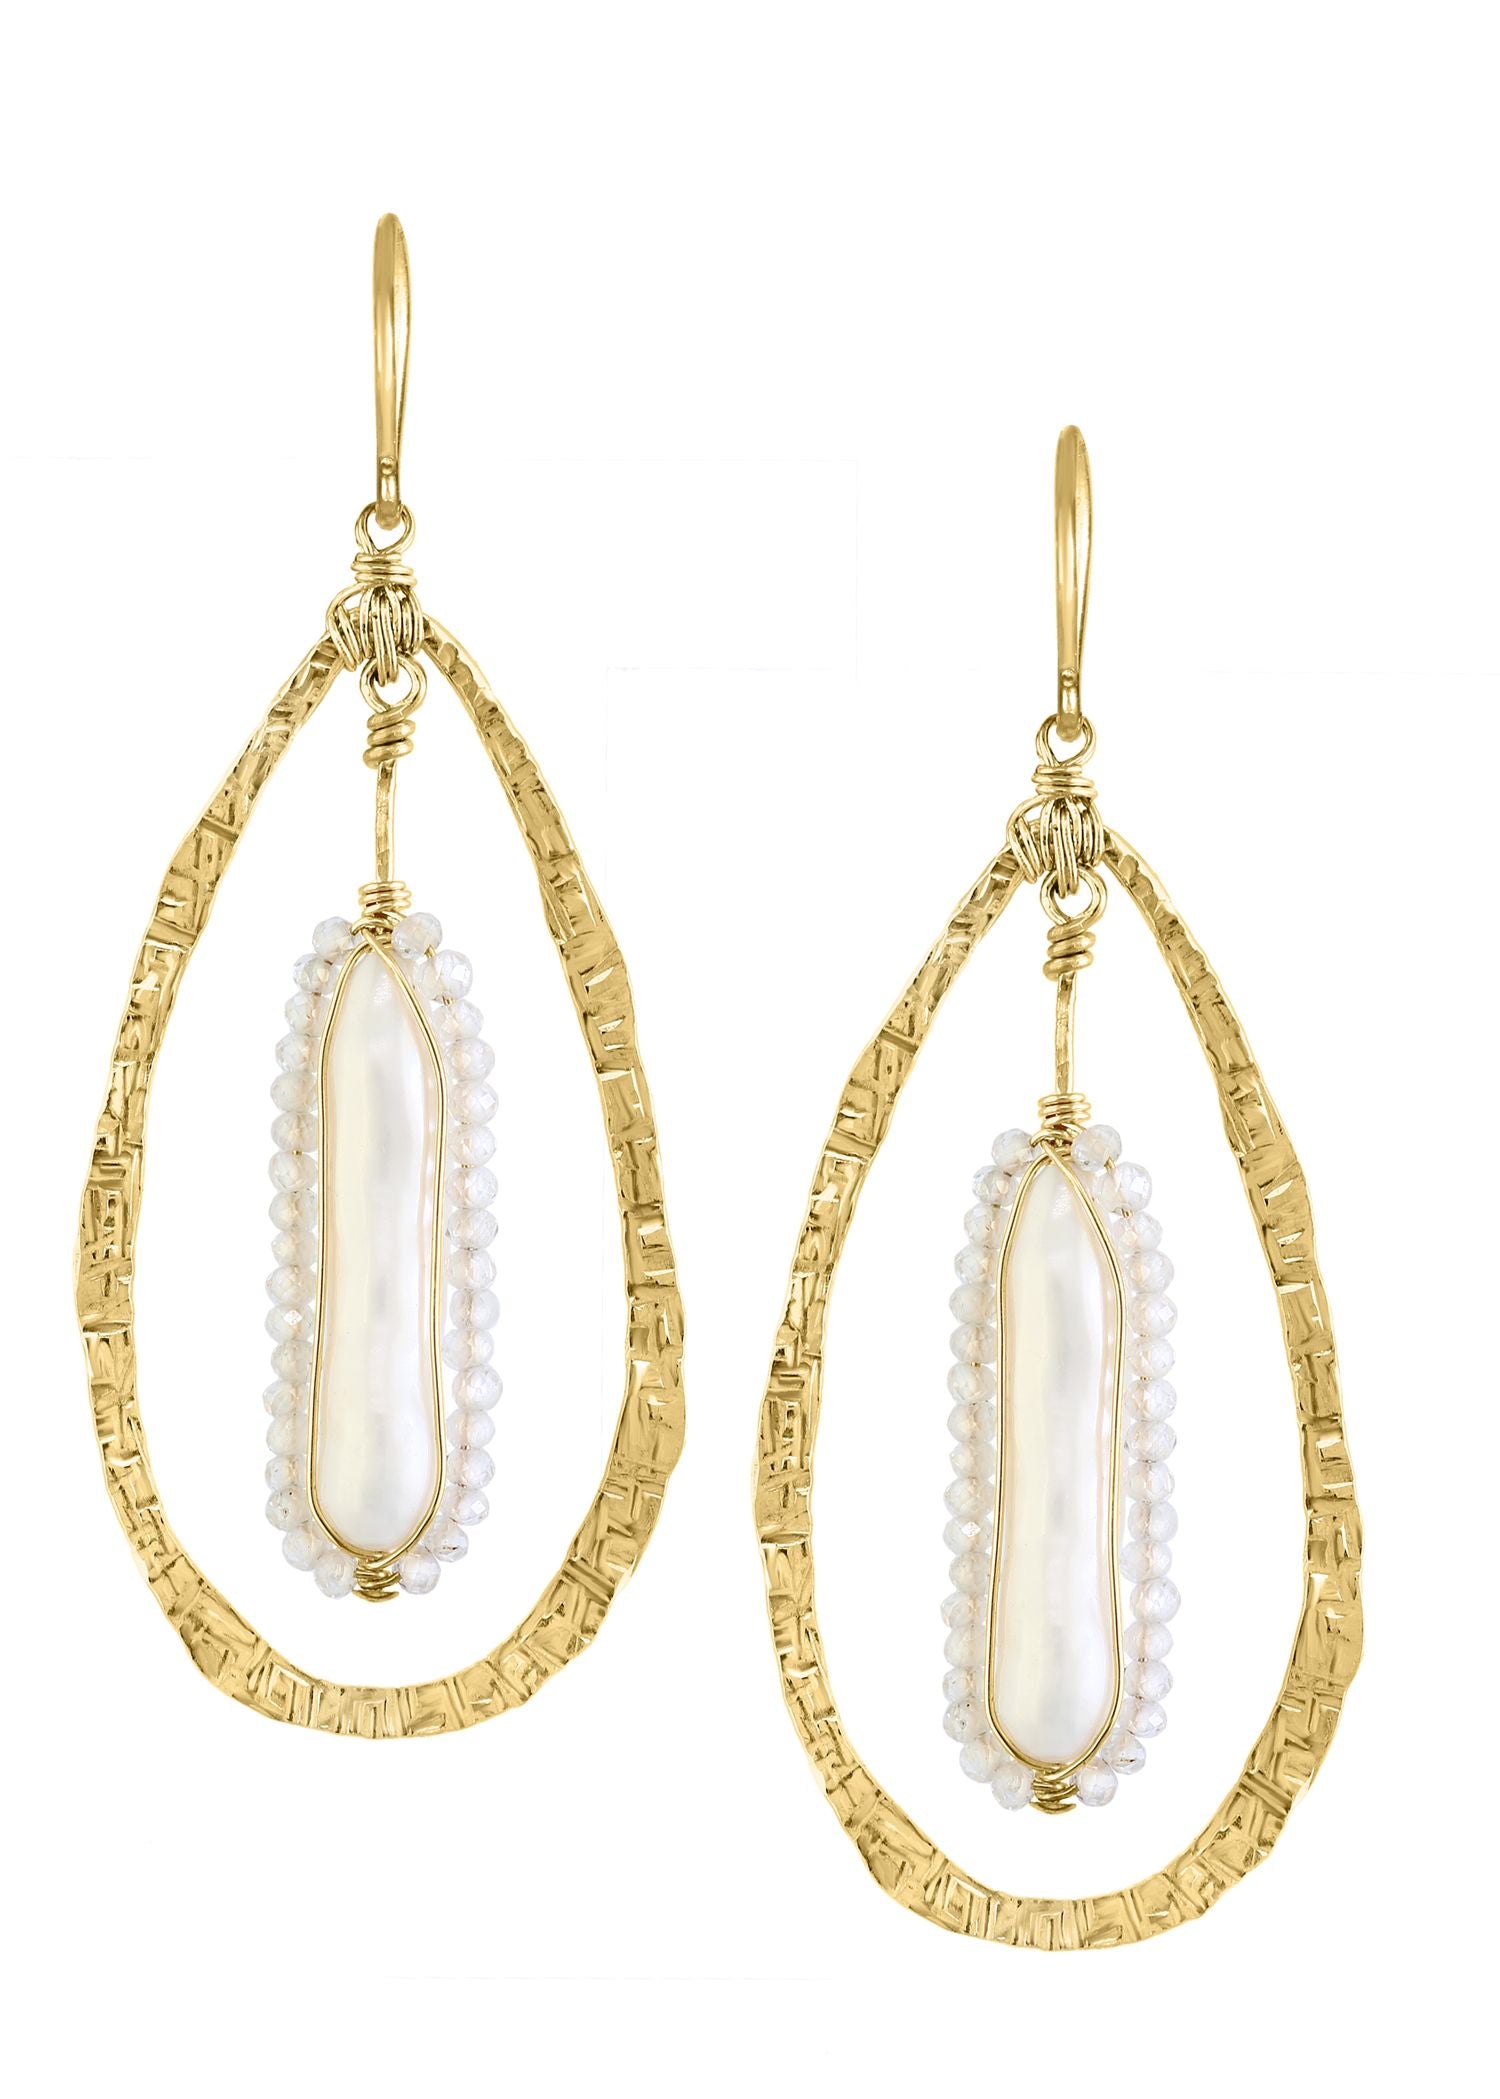 Fresh water pearl White moonstone 14k gold fill Earrings measure 2" in length (including the ear wires) and 11/16" in width Handmade in our Los Angeles studio